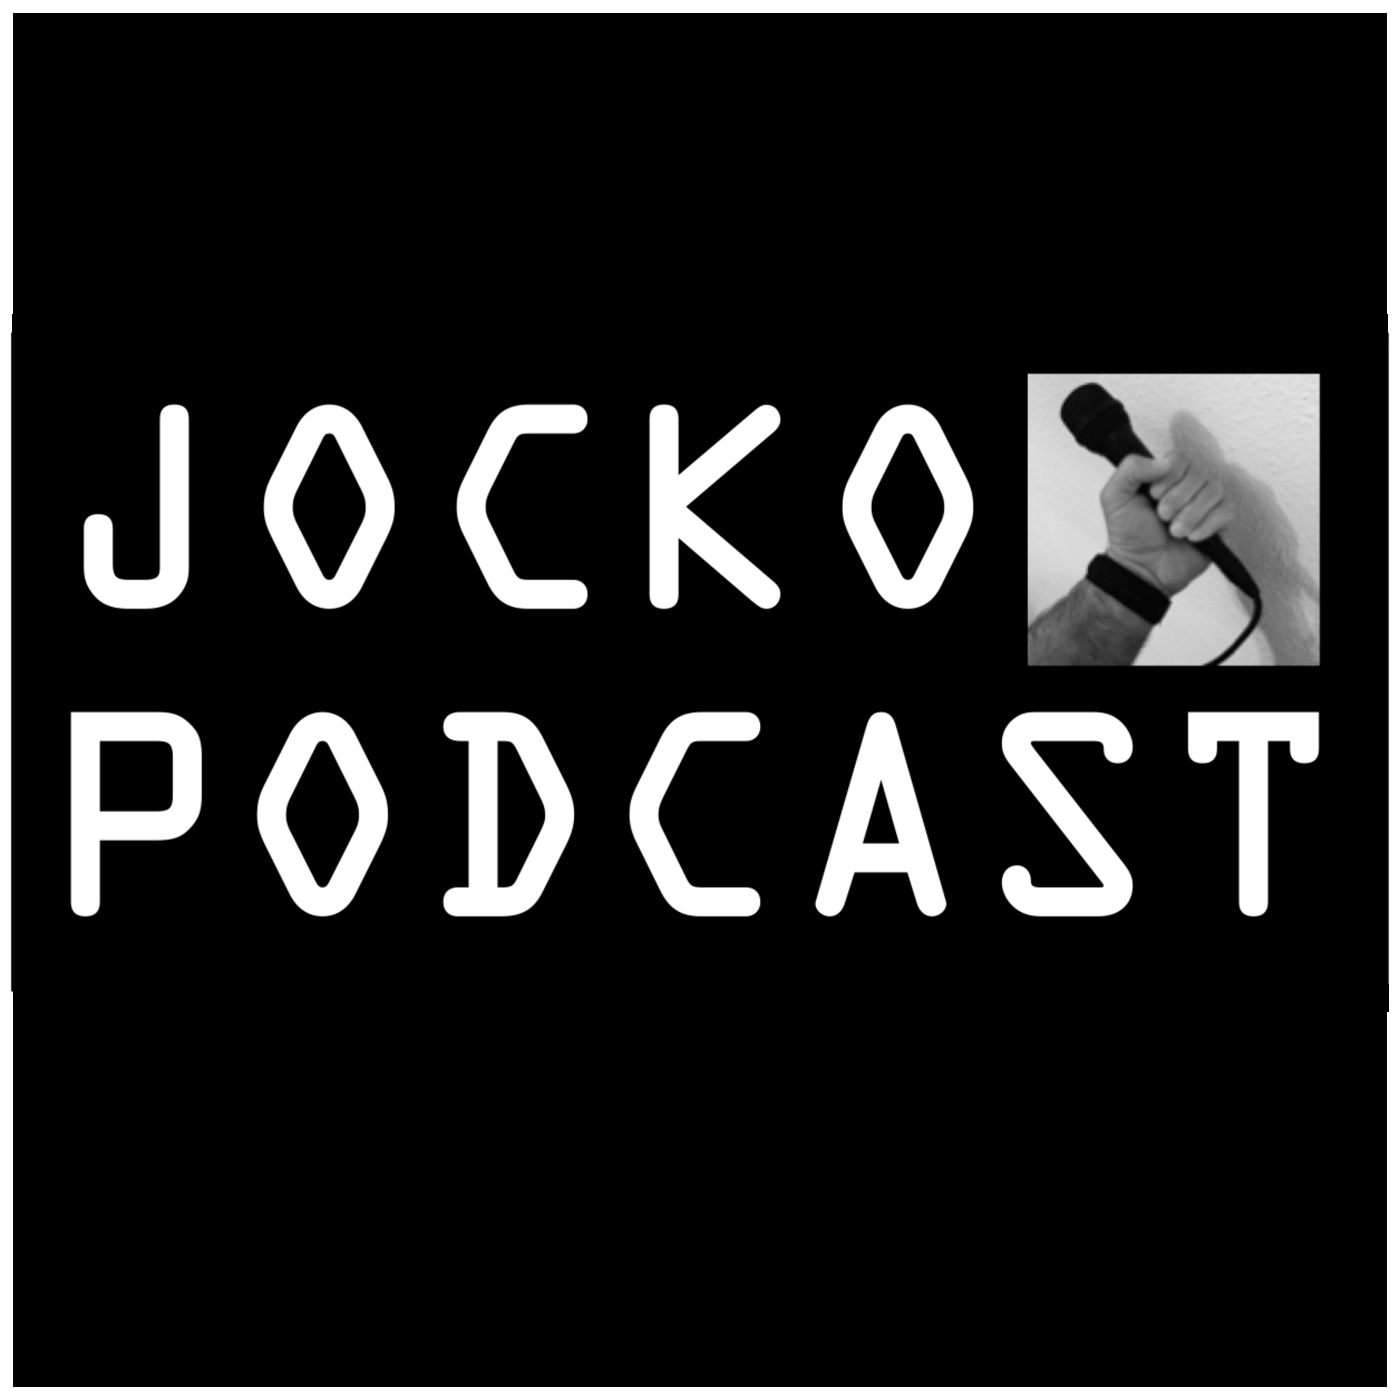 To Deter Shooters, Jocko Thinks Schools Should Have Plain-Clothed Security Guards